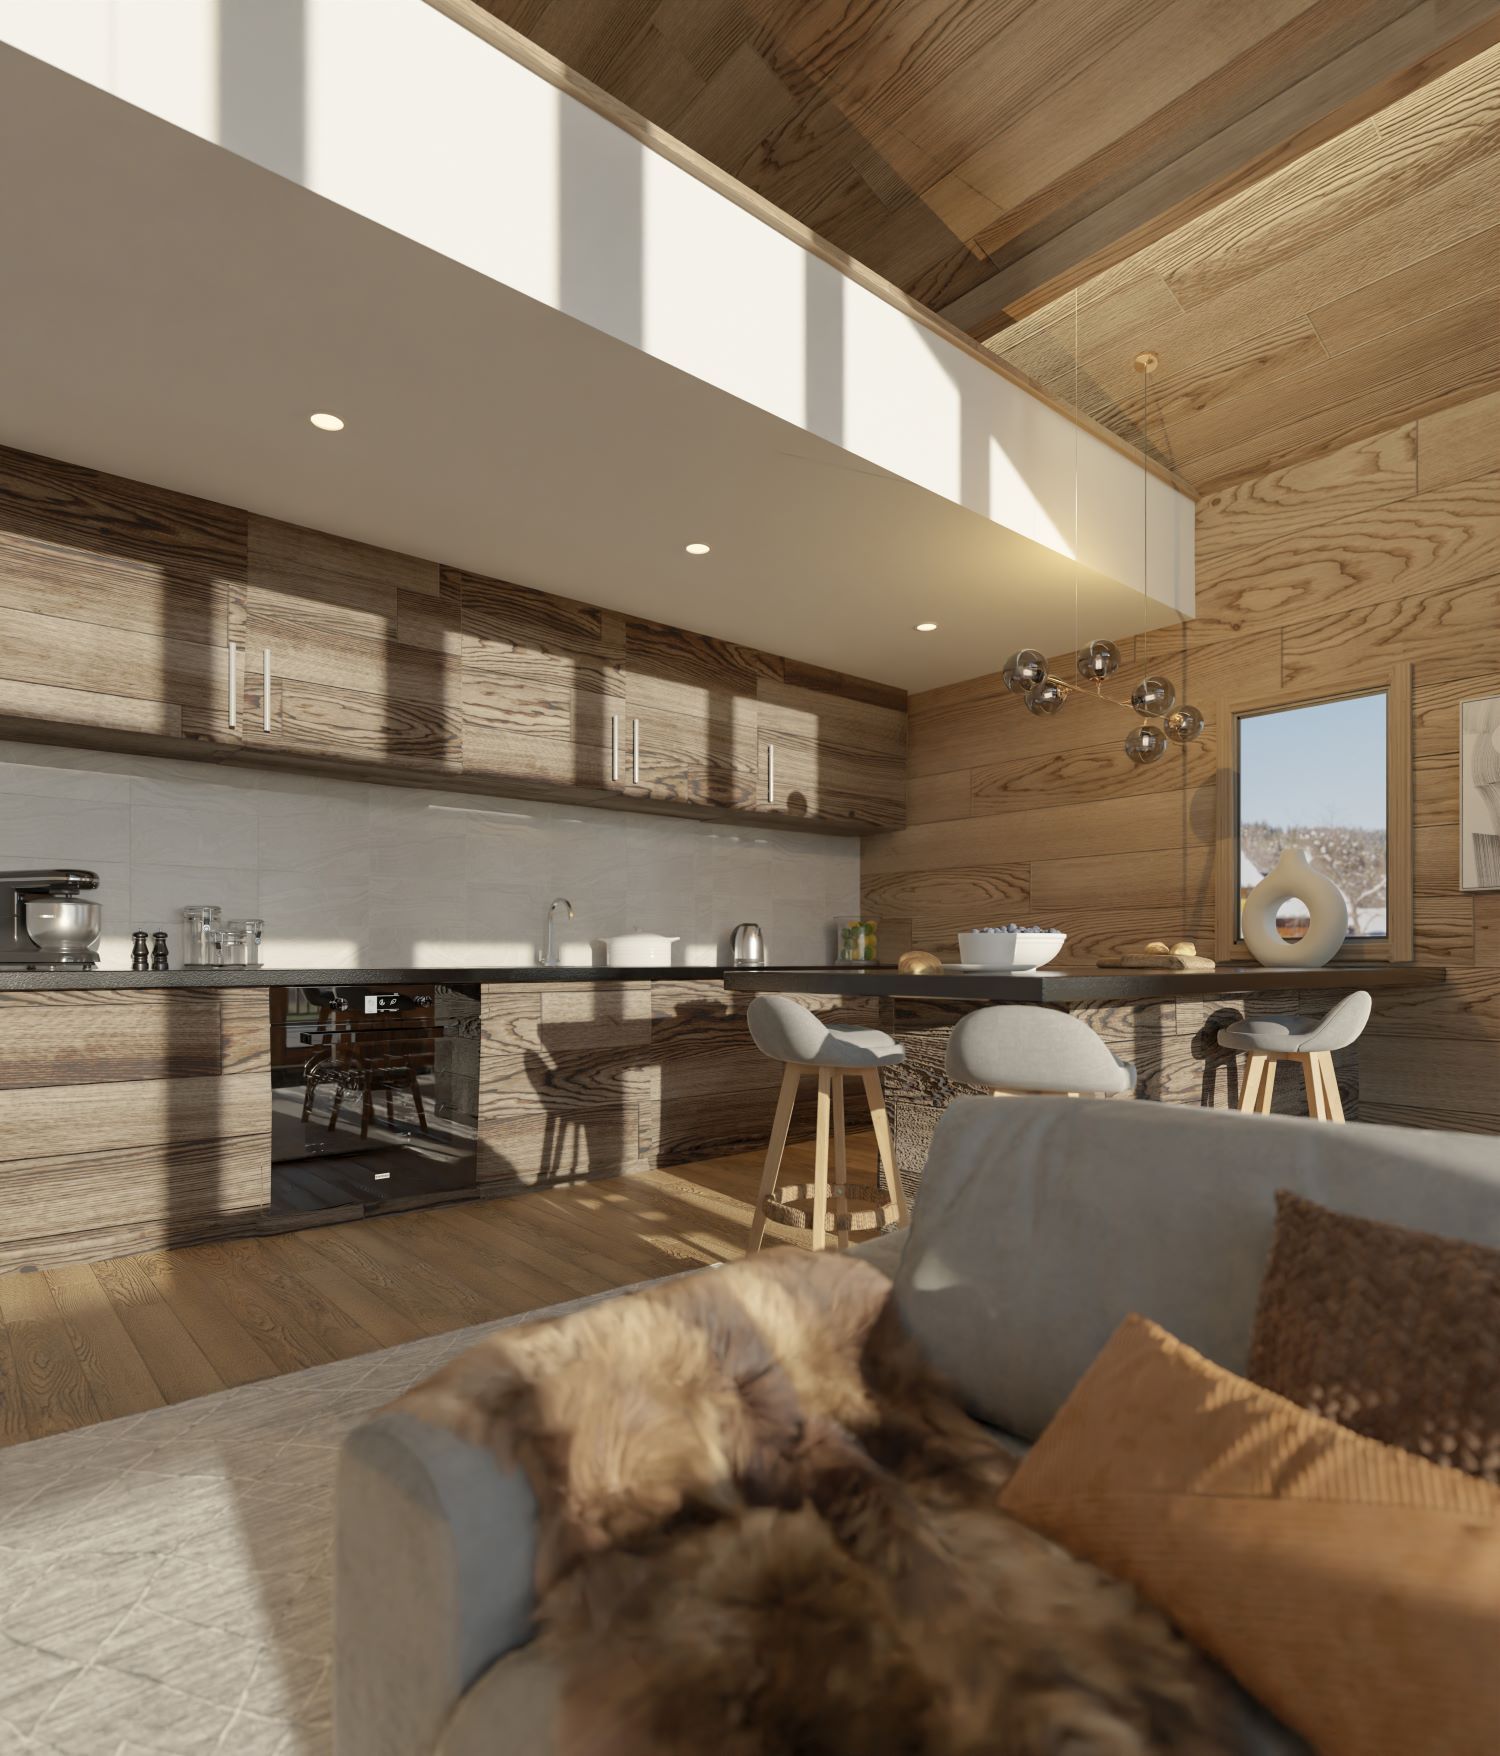 4 bed Penthouse For Sale in Three Valleys, French Alps